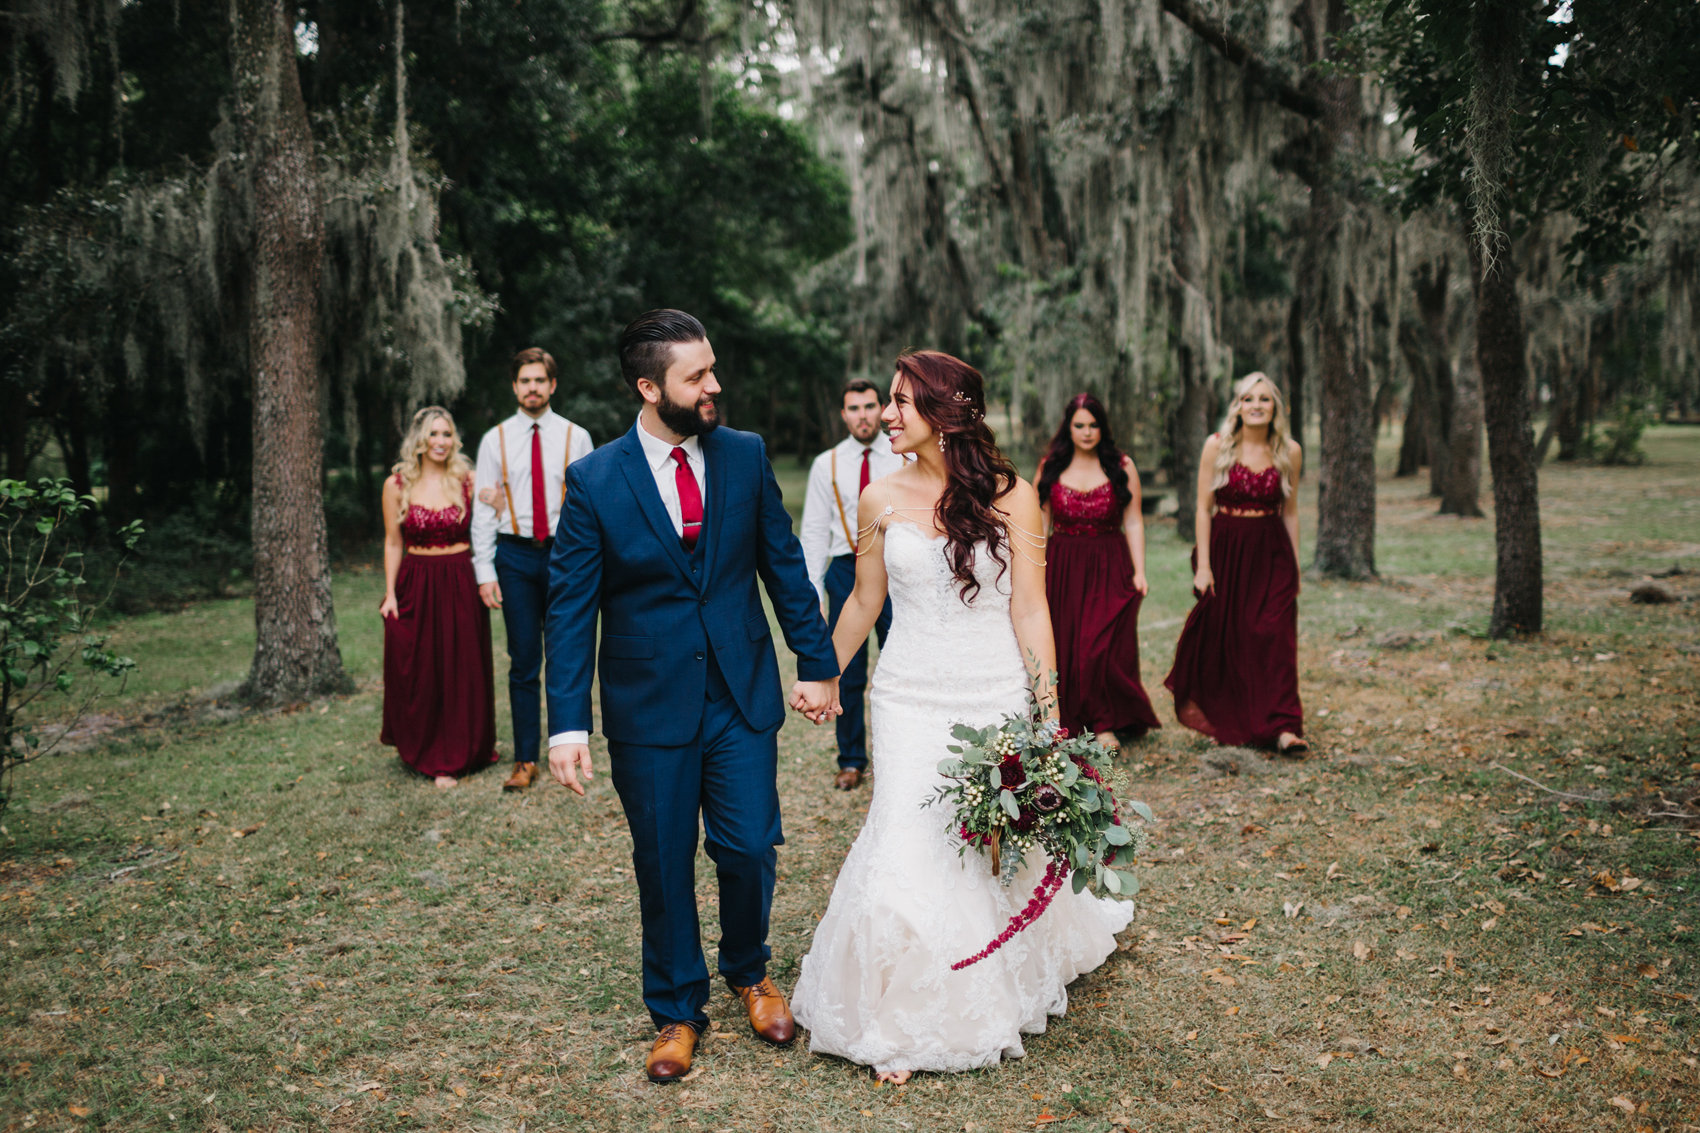 Burgundy and navy wedding party styling in the woods